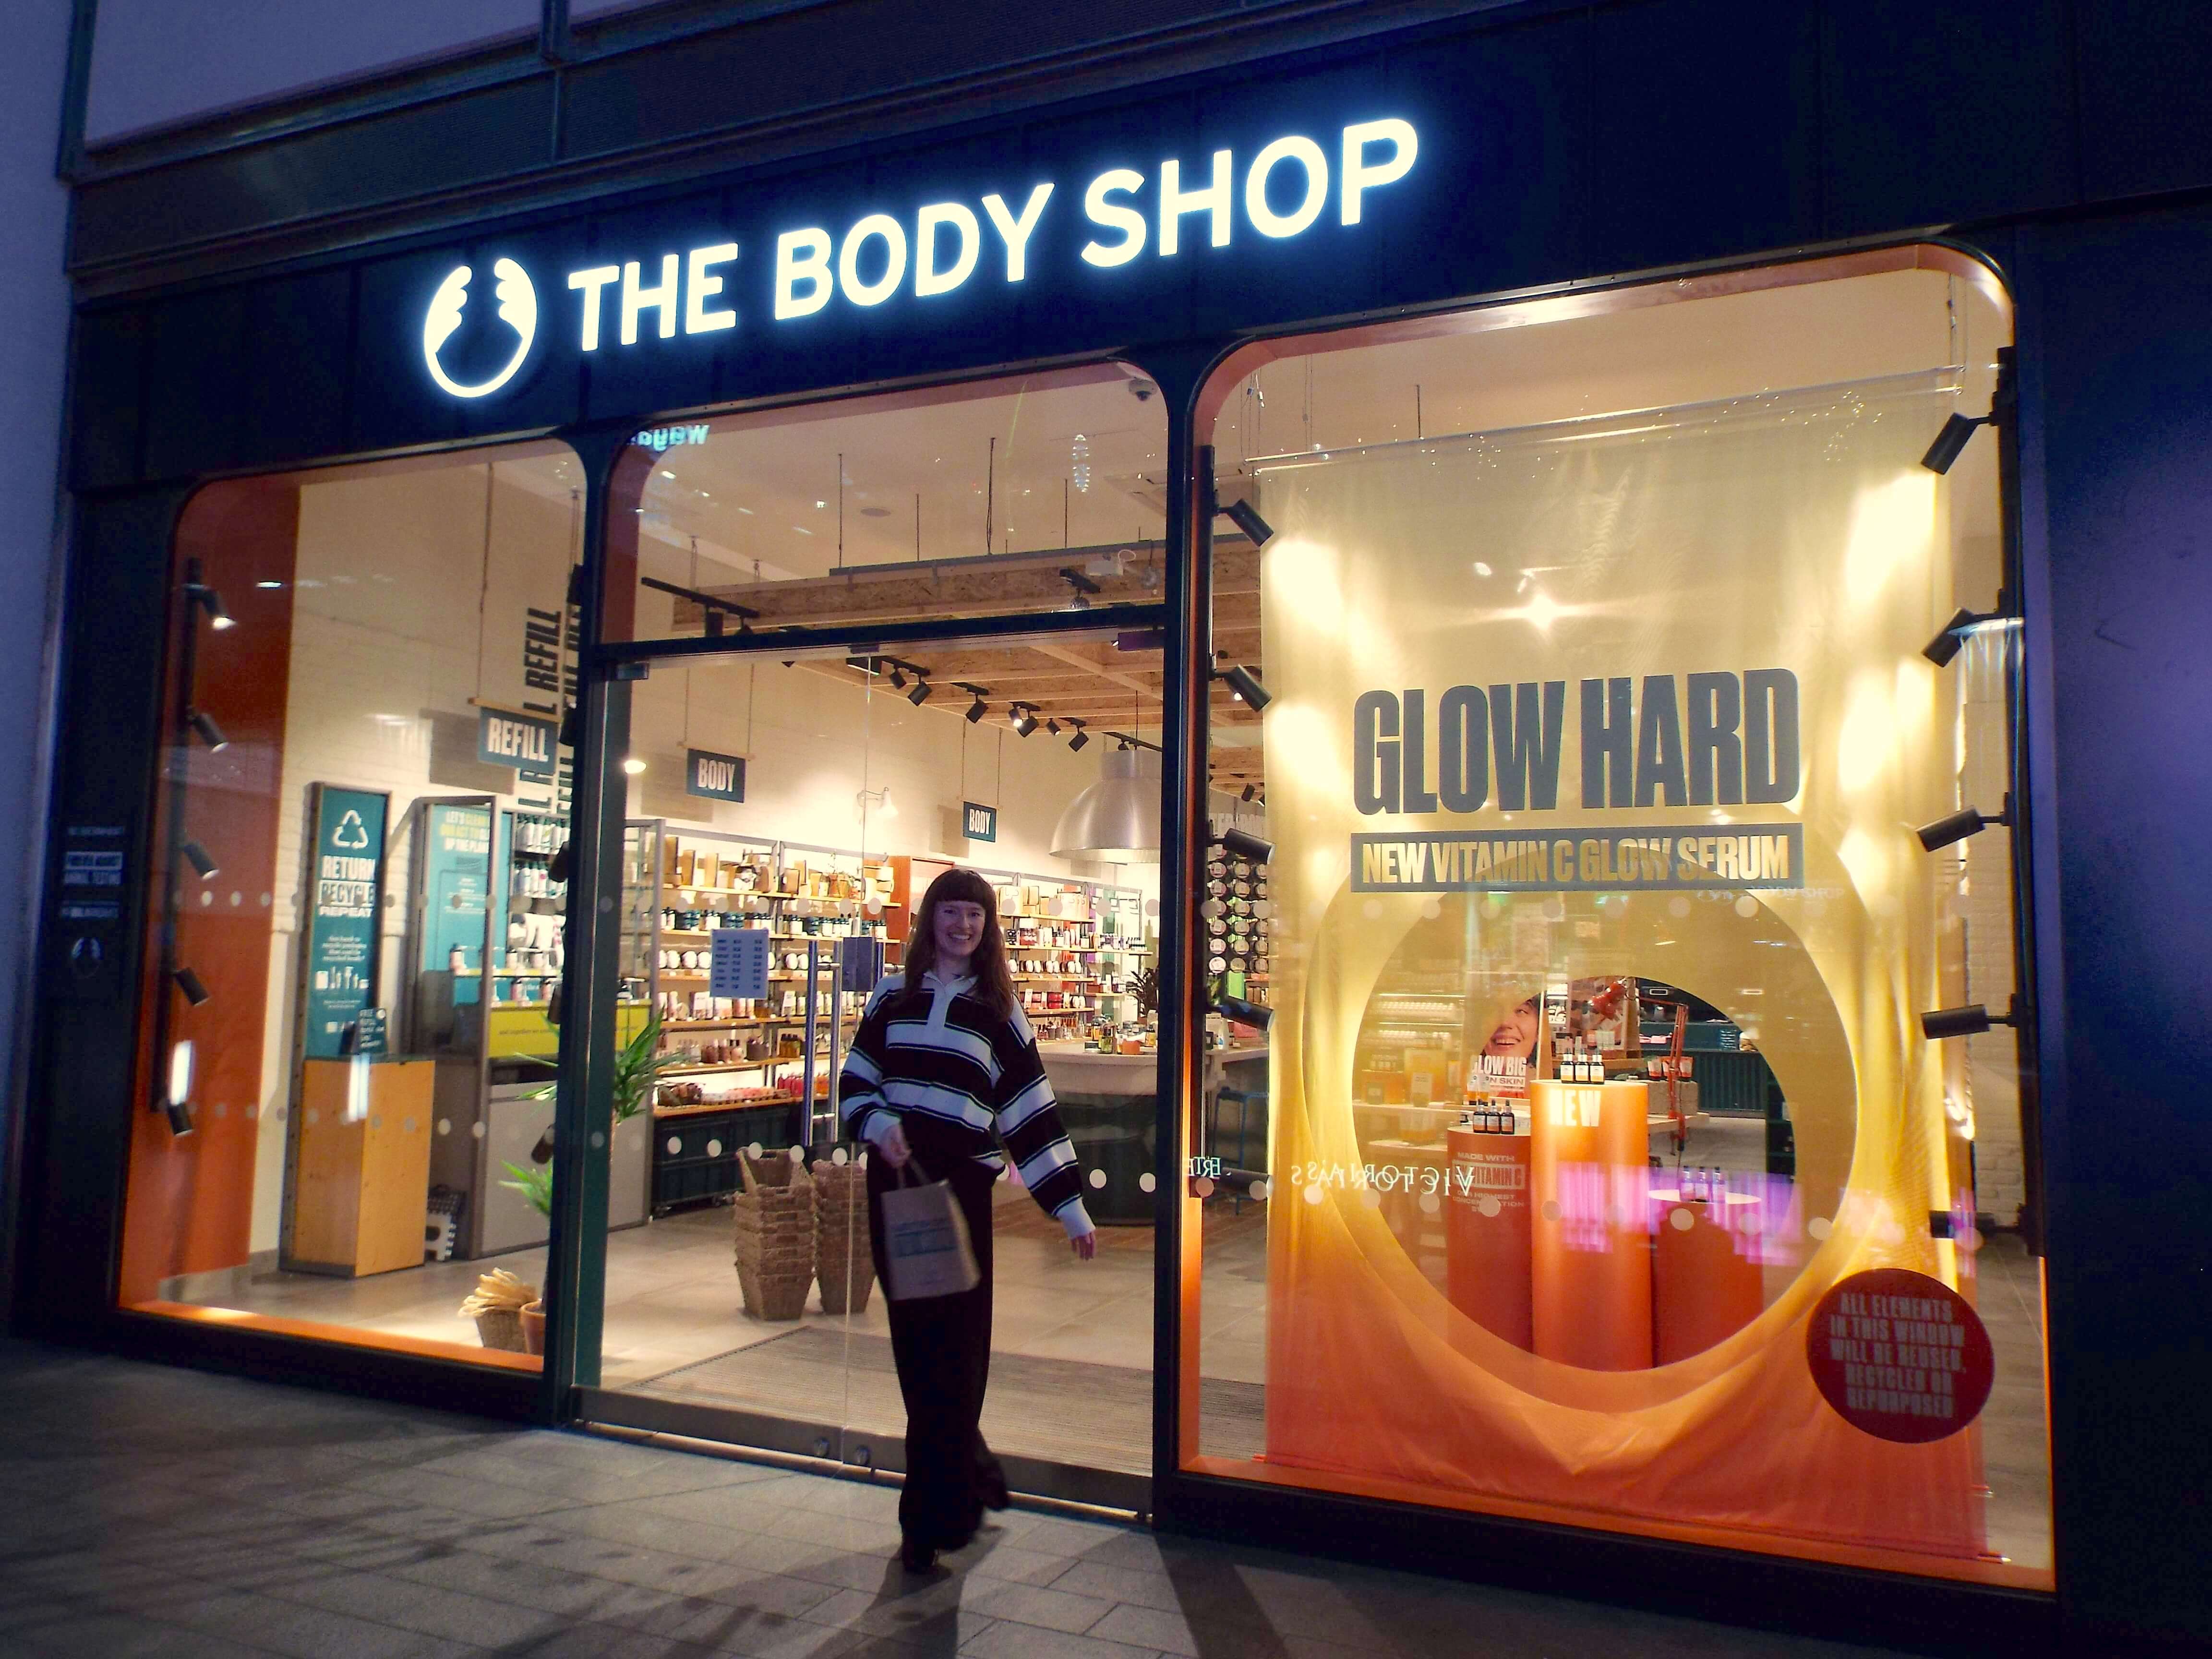 Ellie, cheerfully posed, outside The Body Shop Liverpool One, with a warm exterior to the shop front.